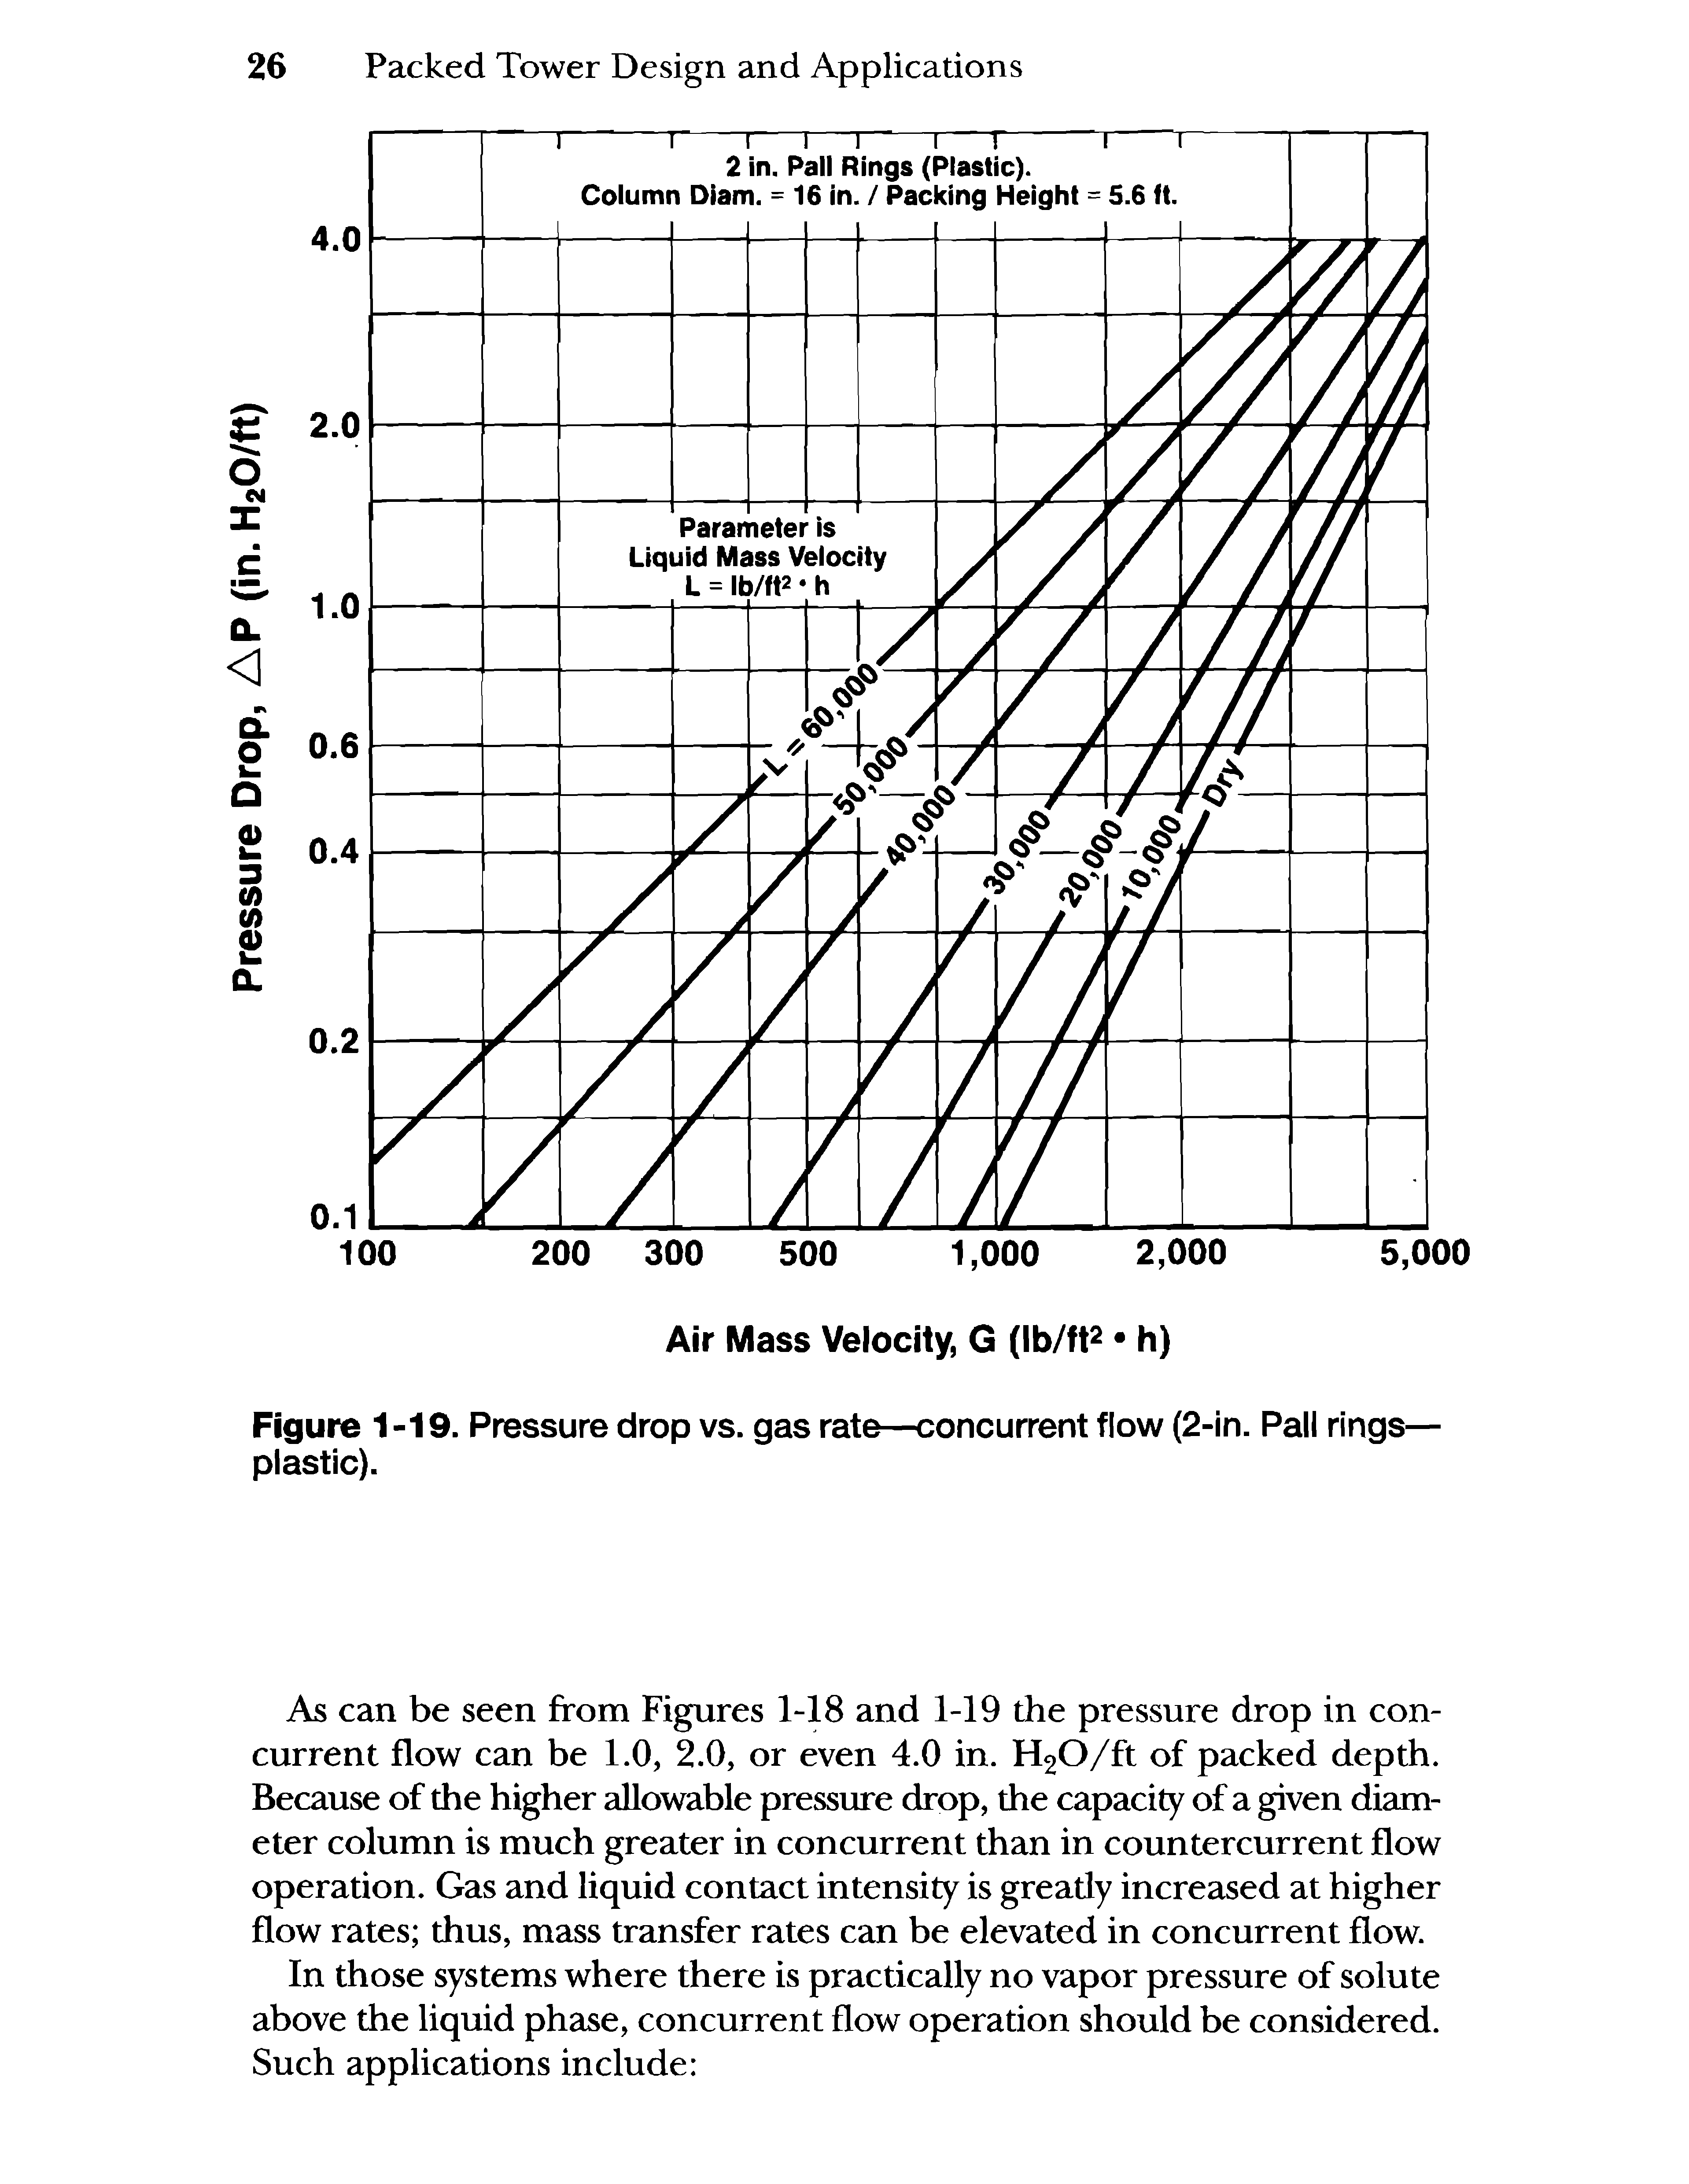 Figure 1-19. Pressure drop vs. gas rate—concurrent flow (2-in. Pall rings plastic).